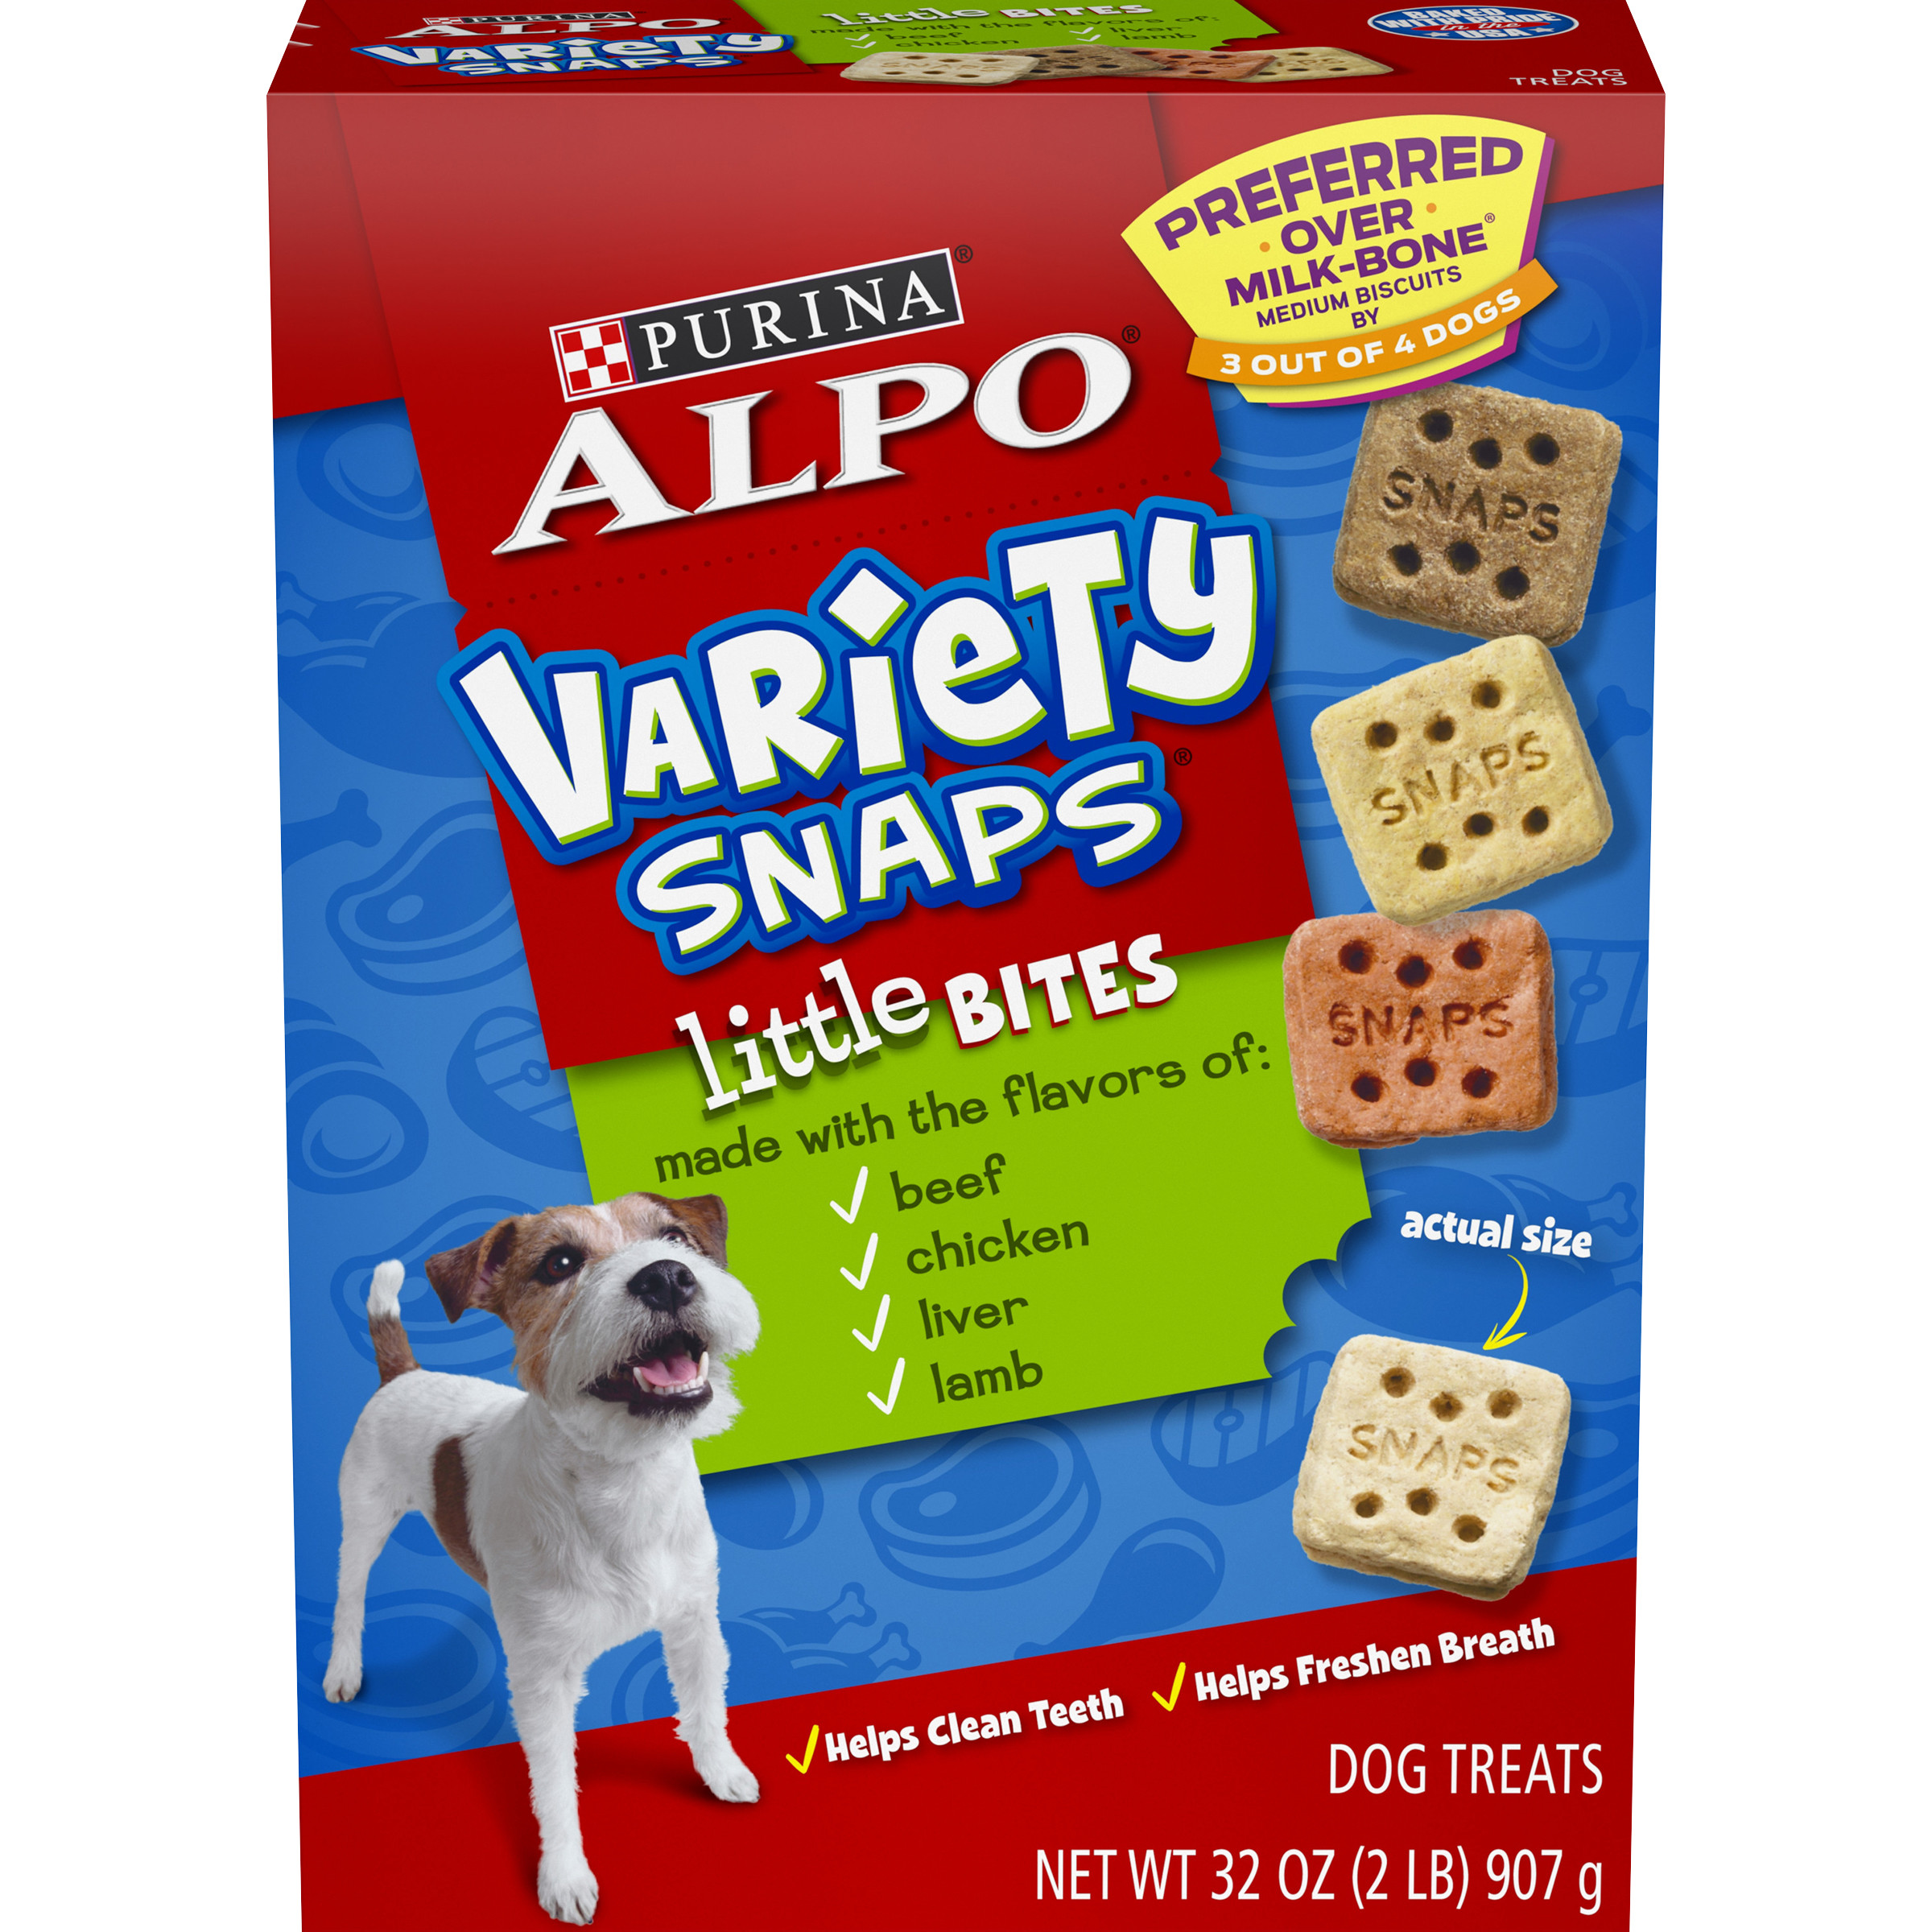 Purina ALPO Variety Snaps Beef Chicken Liver & Lamb Crunchy Treats for Dogs, 32 oz Box - image 1 of 8